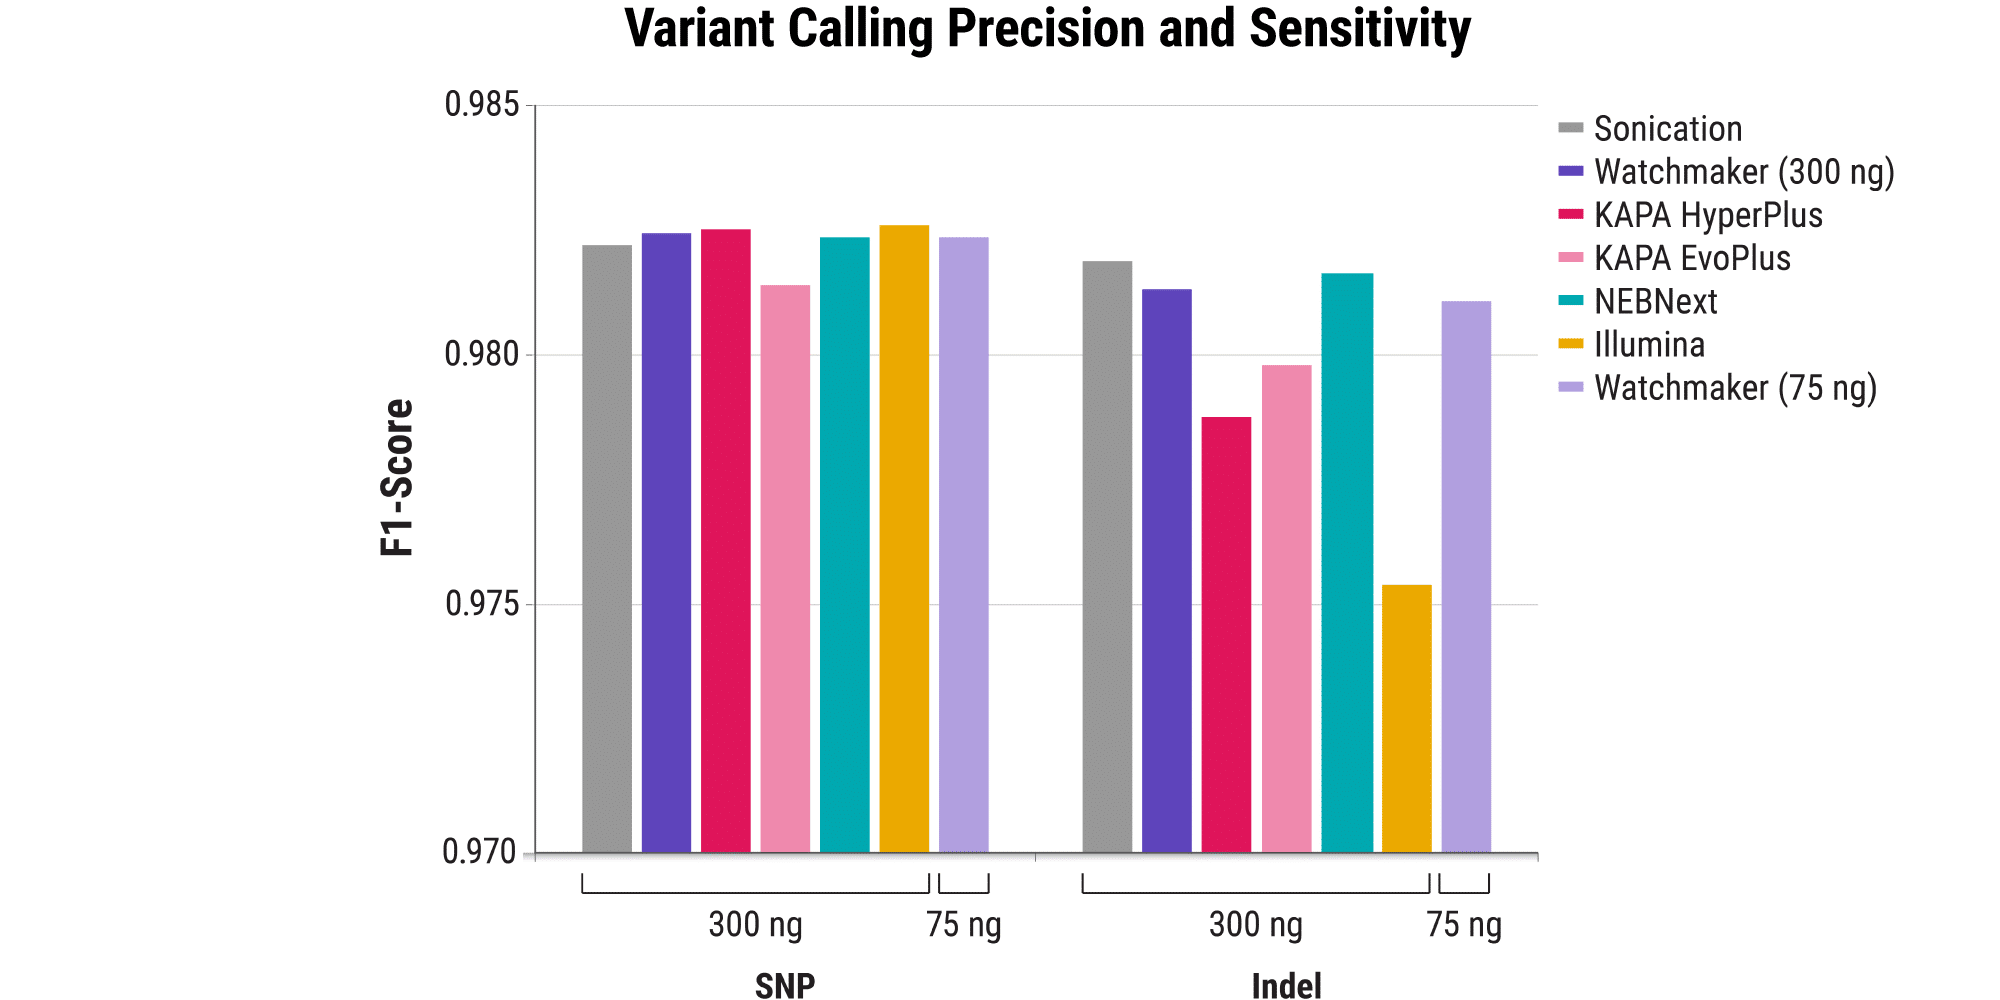 Figure 3C.Sensitive and precise variant calling. With respect to SNP and Indel F1-scores, the Watchmaker libraries deliver variant calling performance on-par with the sonication control.